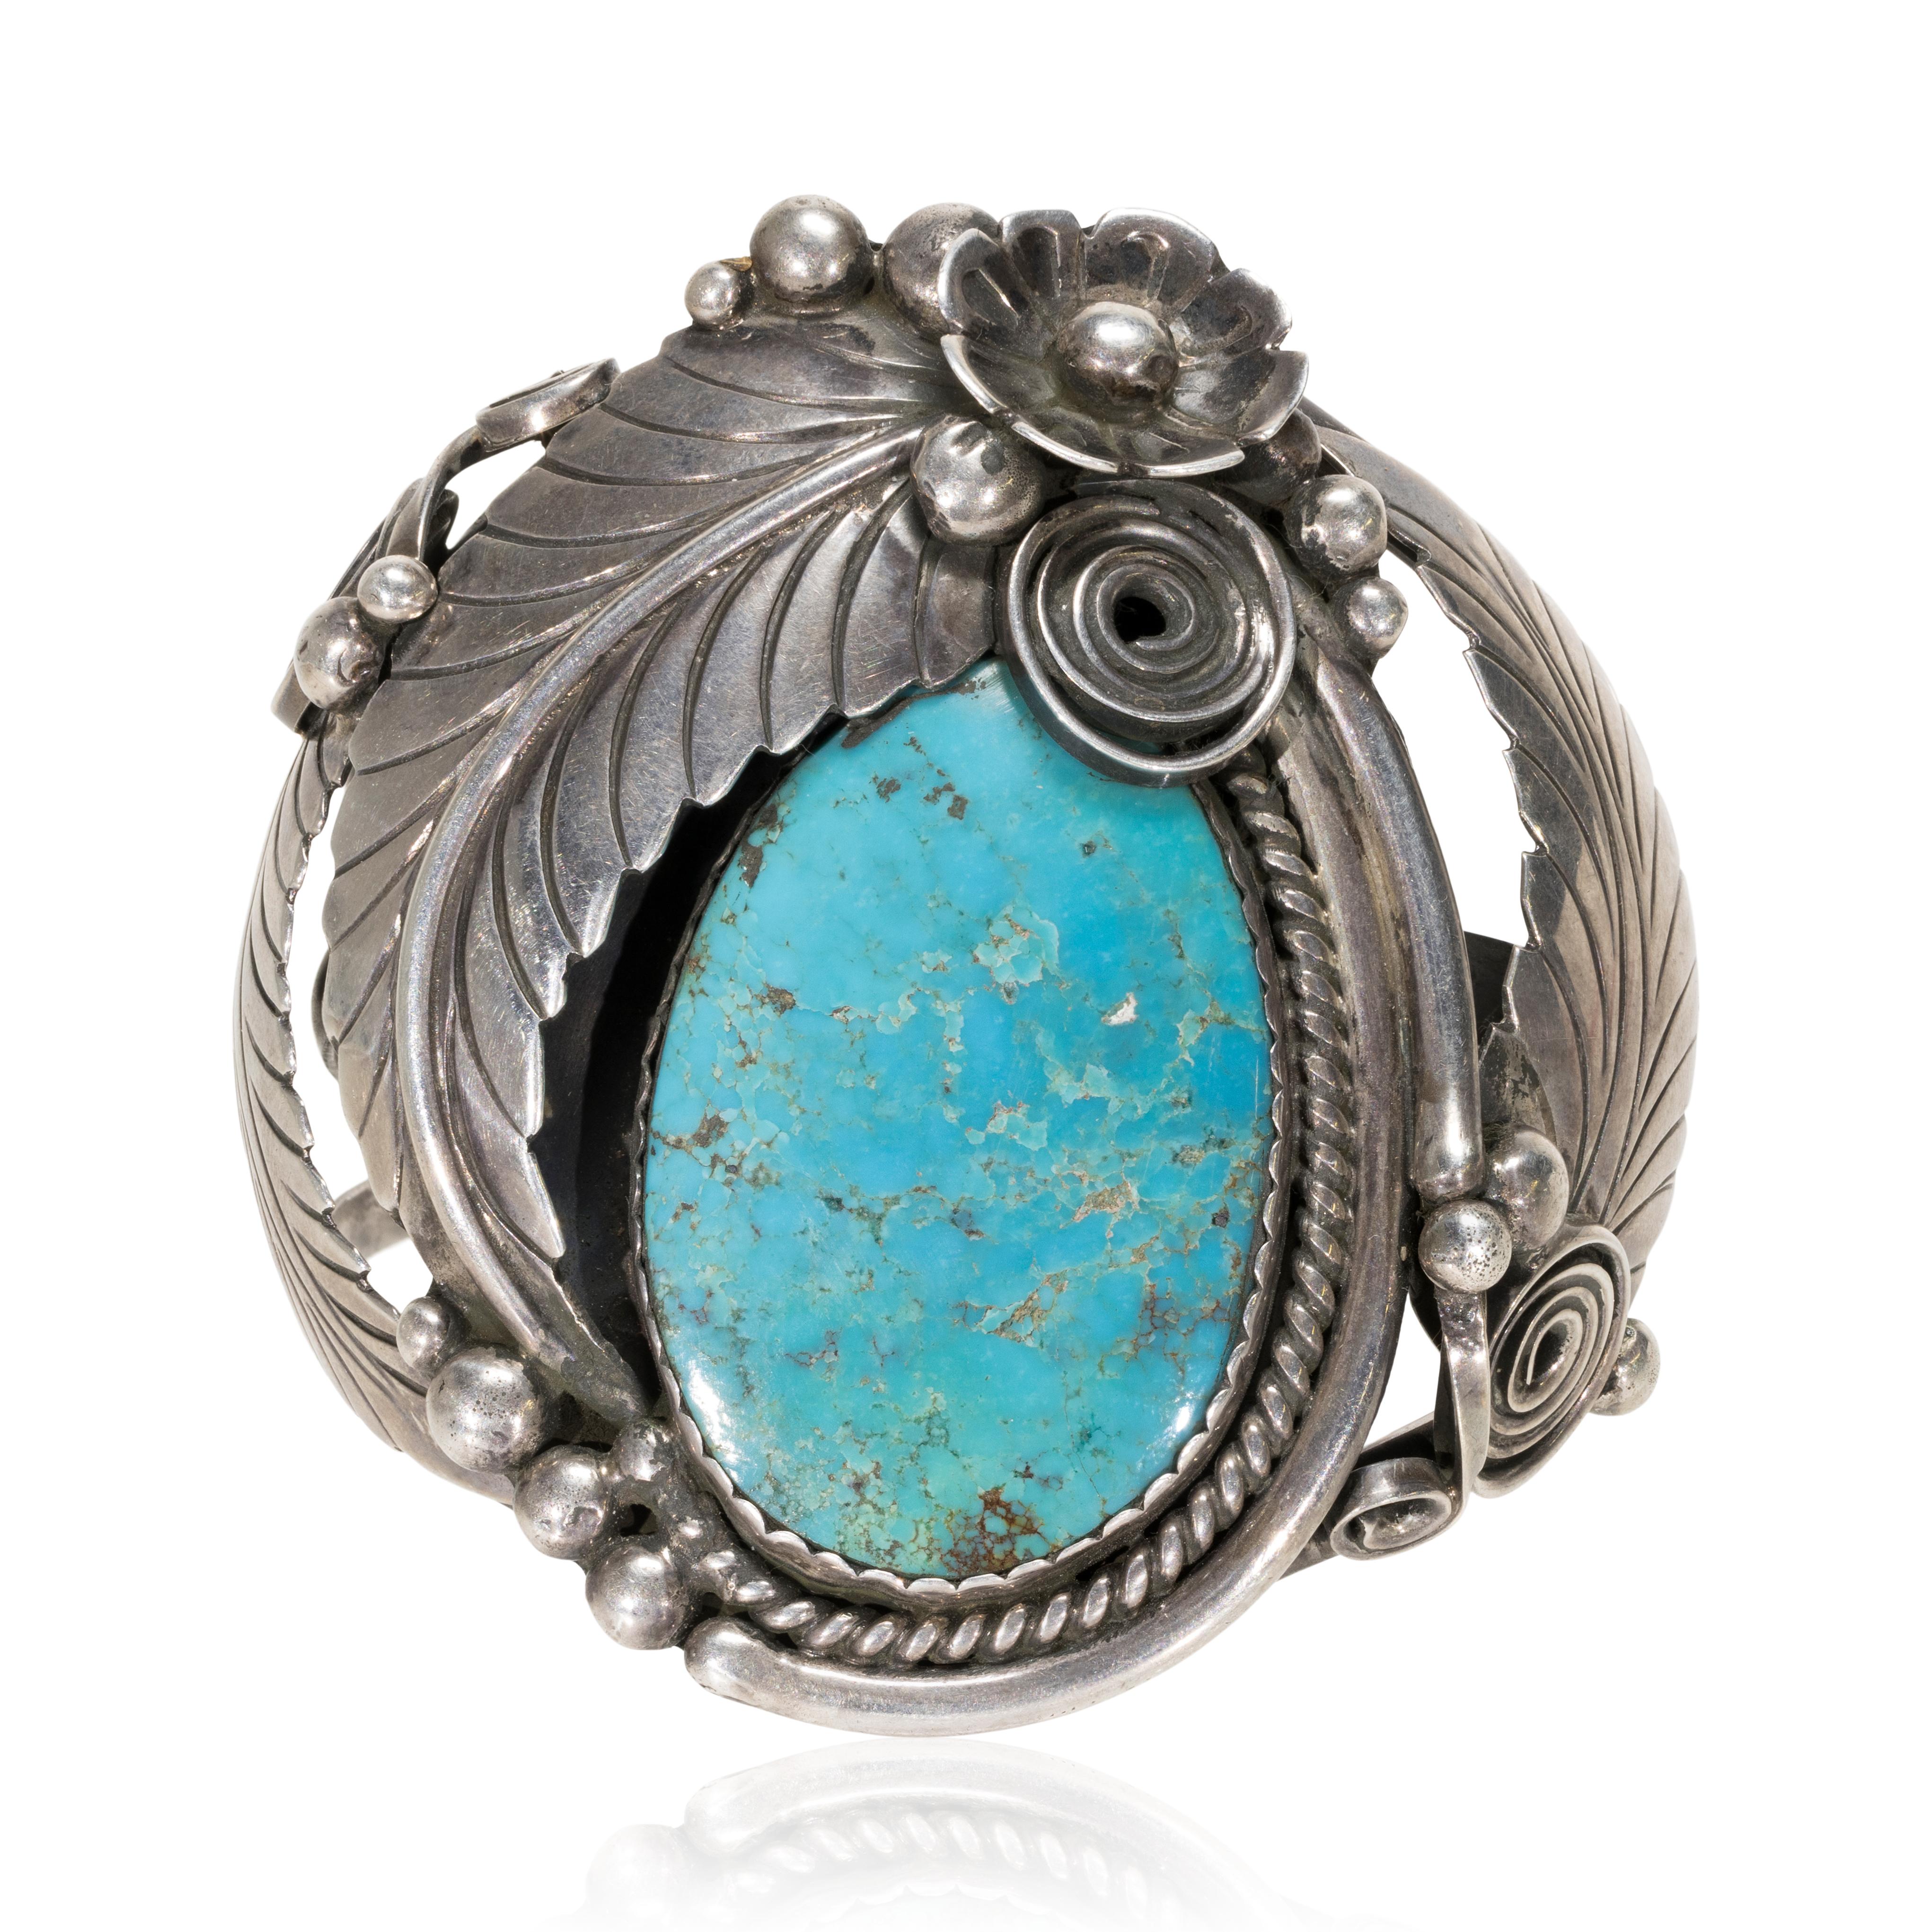 Navajo Kingman turquoise and sterling racelet. Beautiful large stone surrounded by twisted rop leaves, flowers and scrolls. Some flexibility to the wrist. Nice patina that can be buffed out easily to make shine.

PERIOD: Late 20th Century

ORIGIN: